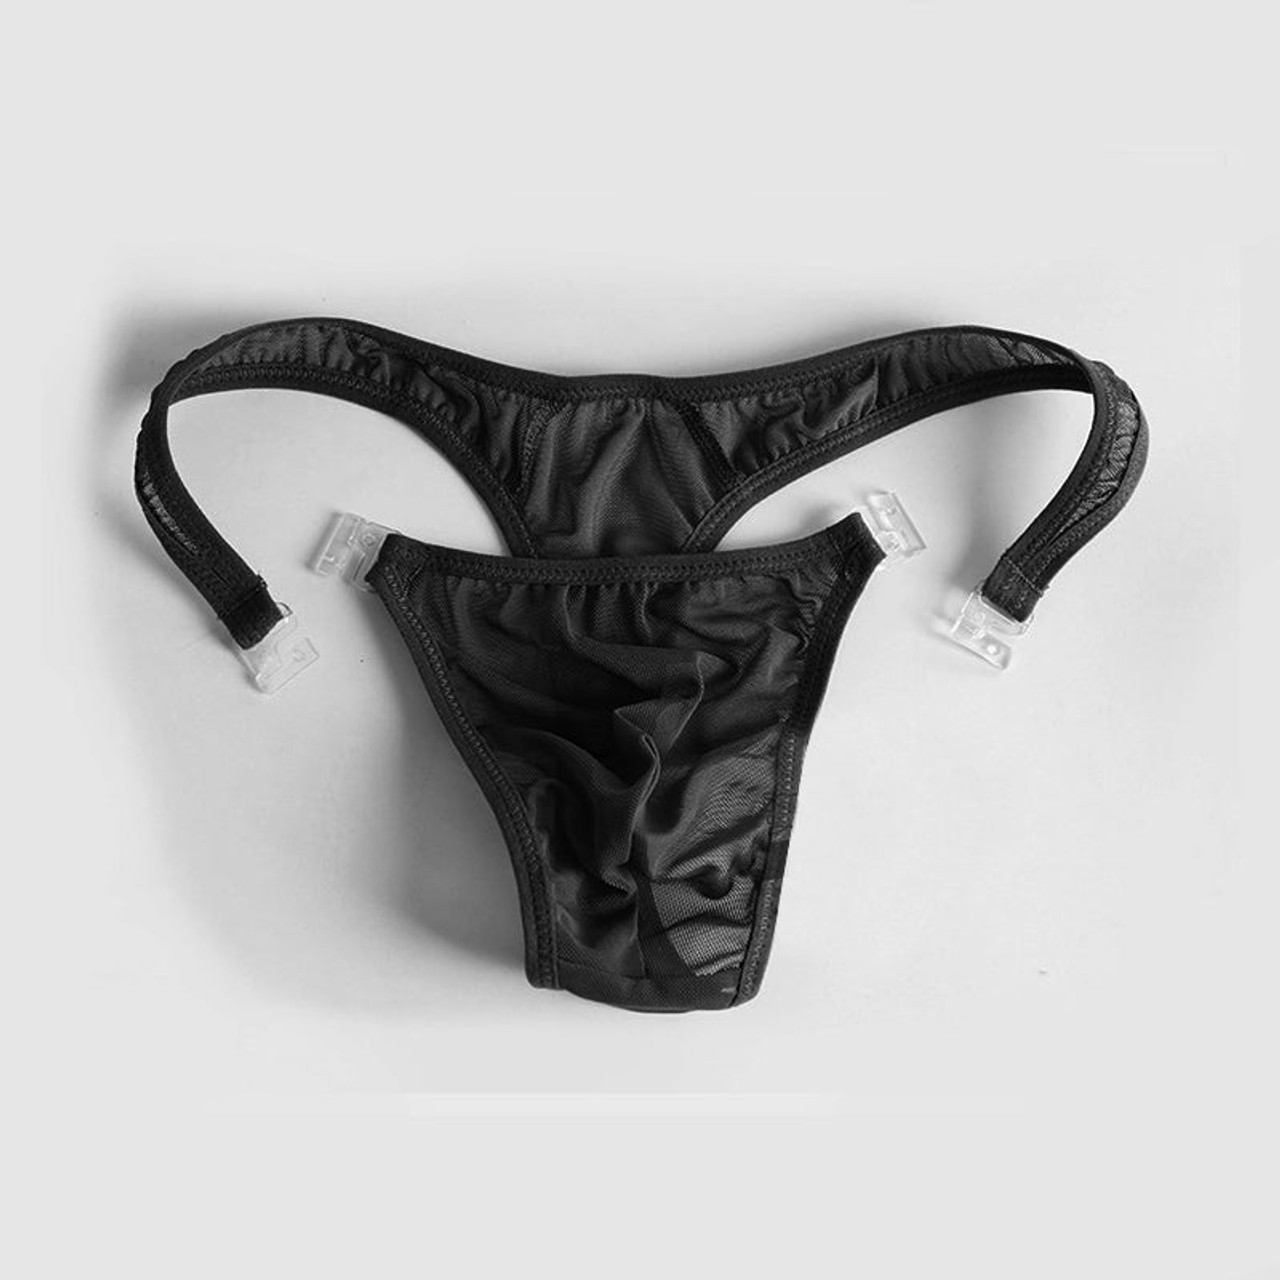 Men's Sexy G-strings & Thongs Lace Transparent Underwear